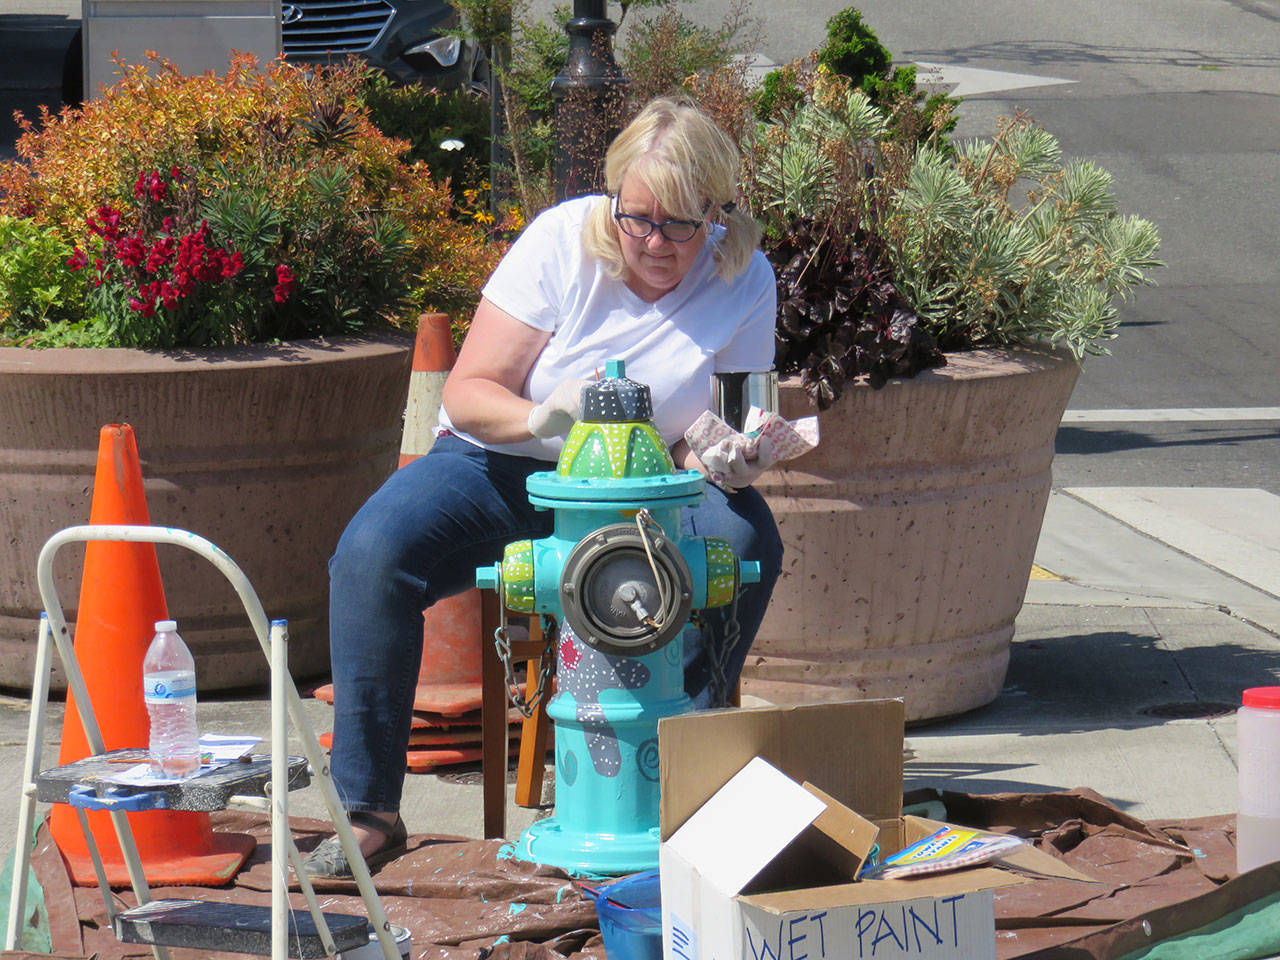 Before she moves to Santa Fe, Lizbeth Cort paints the first fire hydrant as a test for an upcoming Oak Harbor Arts Commission project. Photo provided by the Oak Harbor Arts Commission